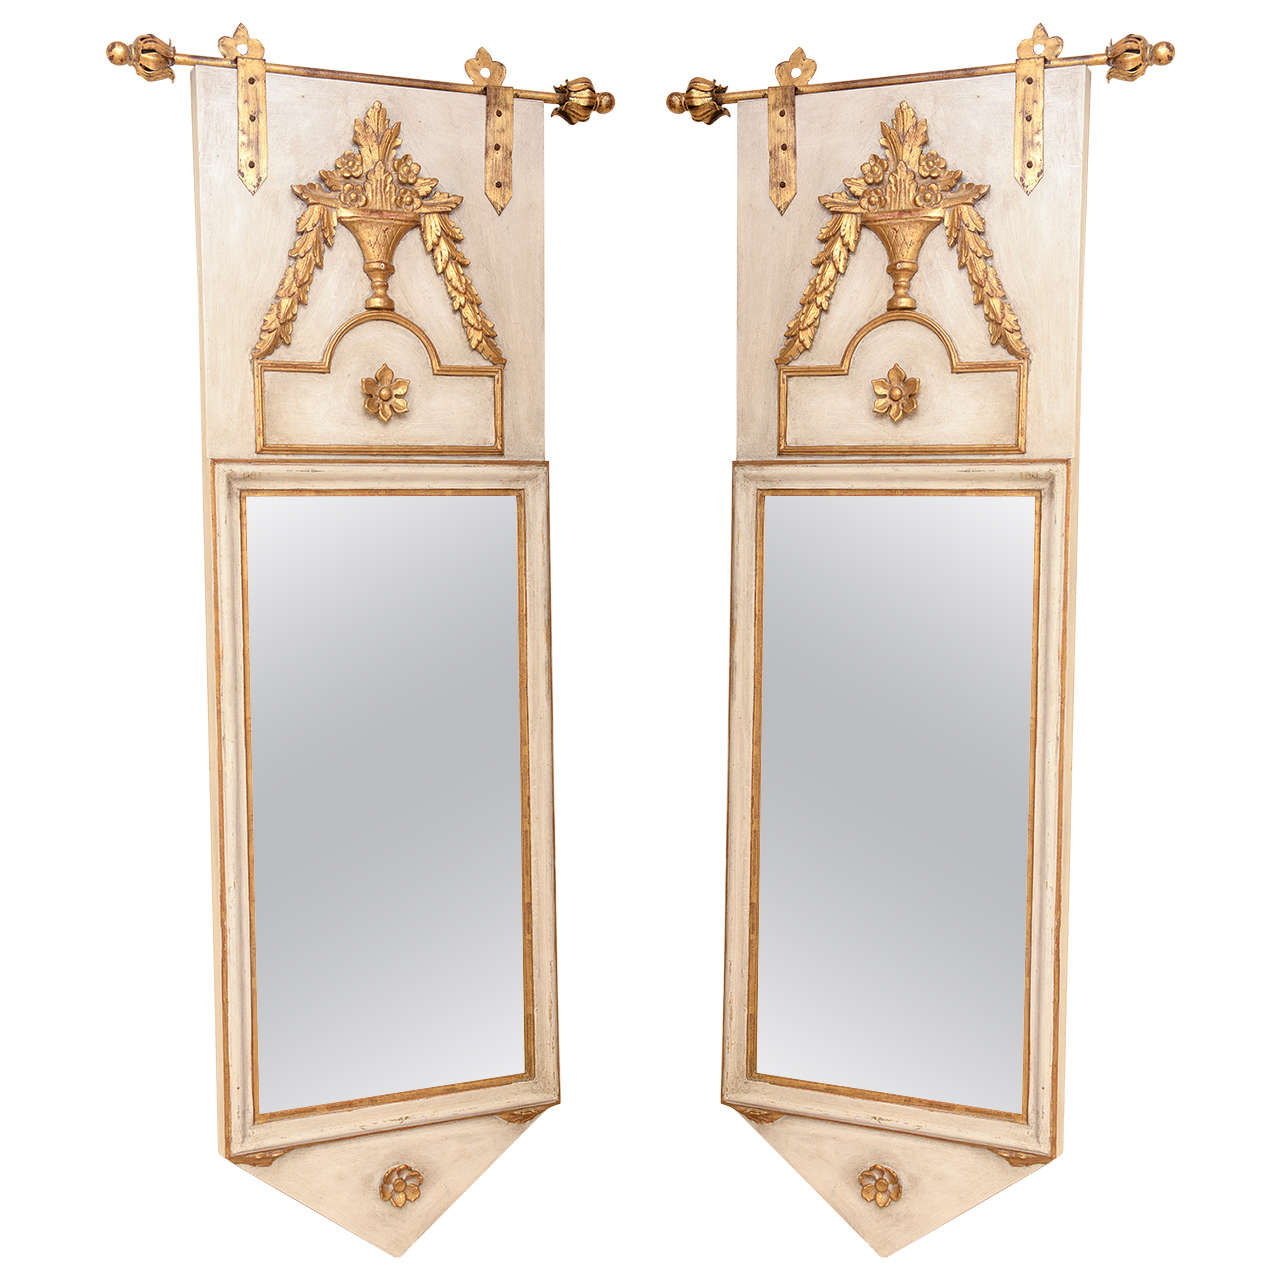 Pair of "Banner" Italian Wall Mirrors on Gilded Iron Hanging Bars